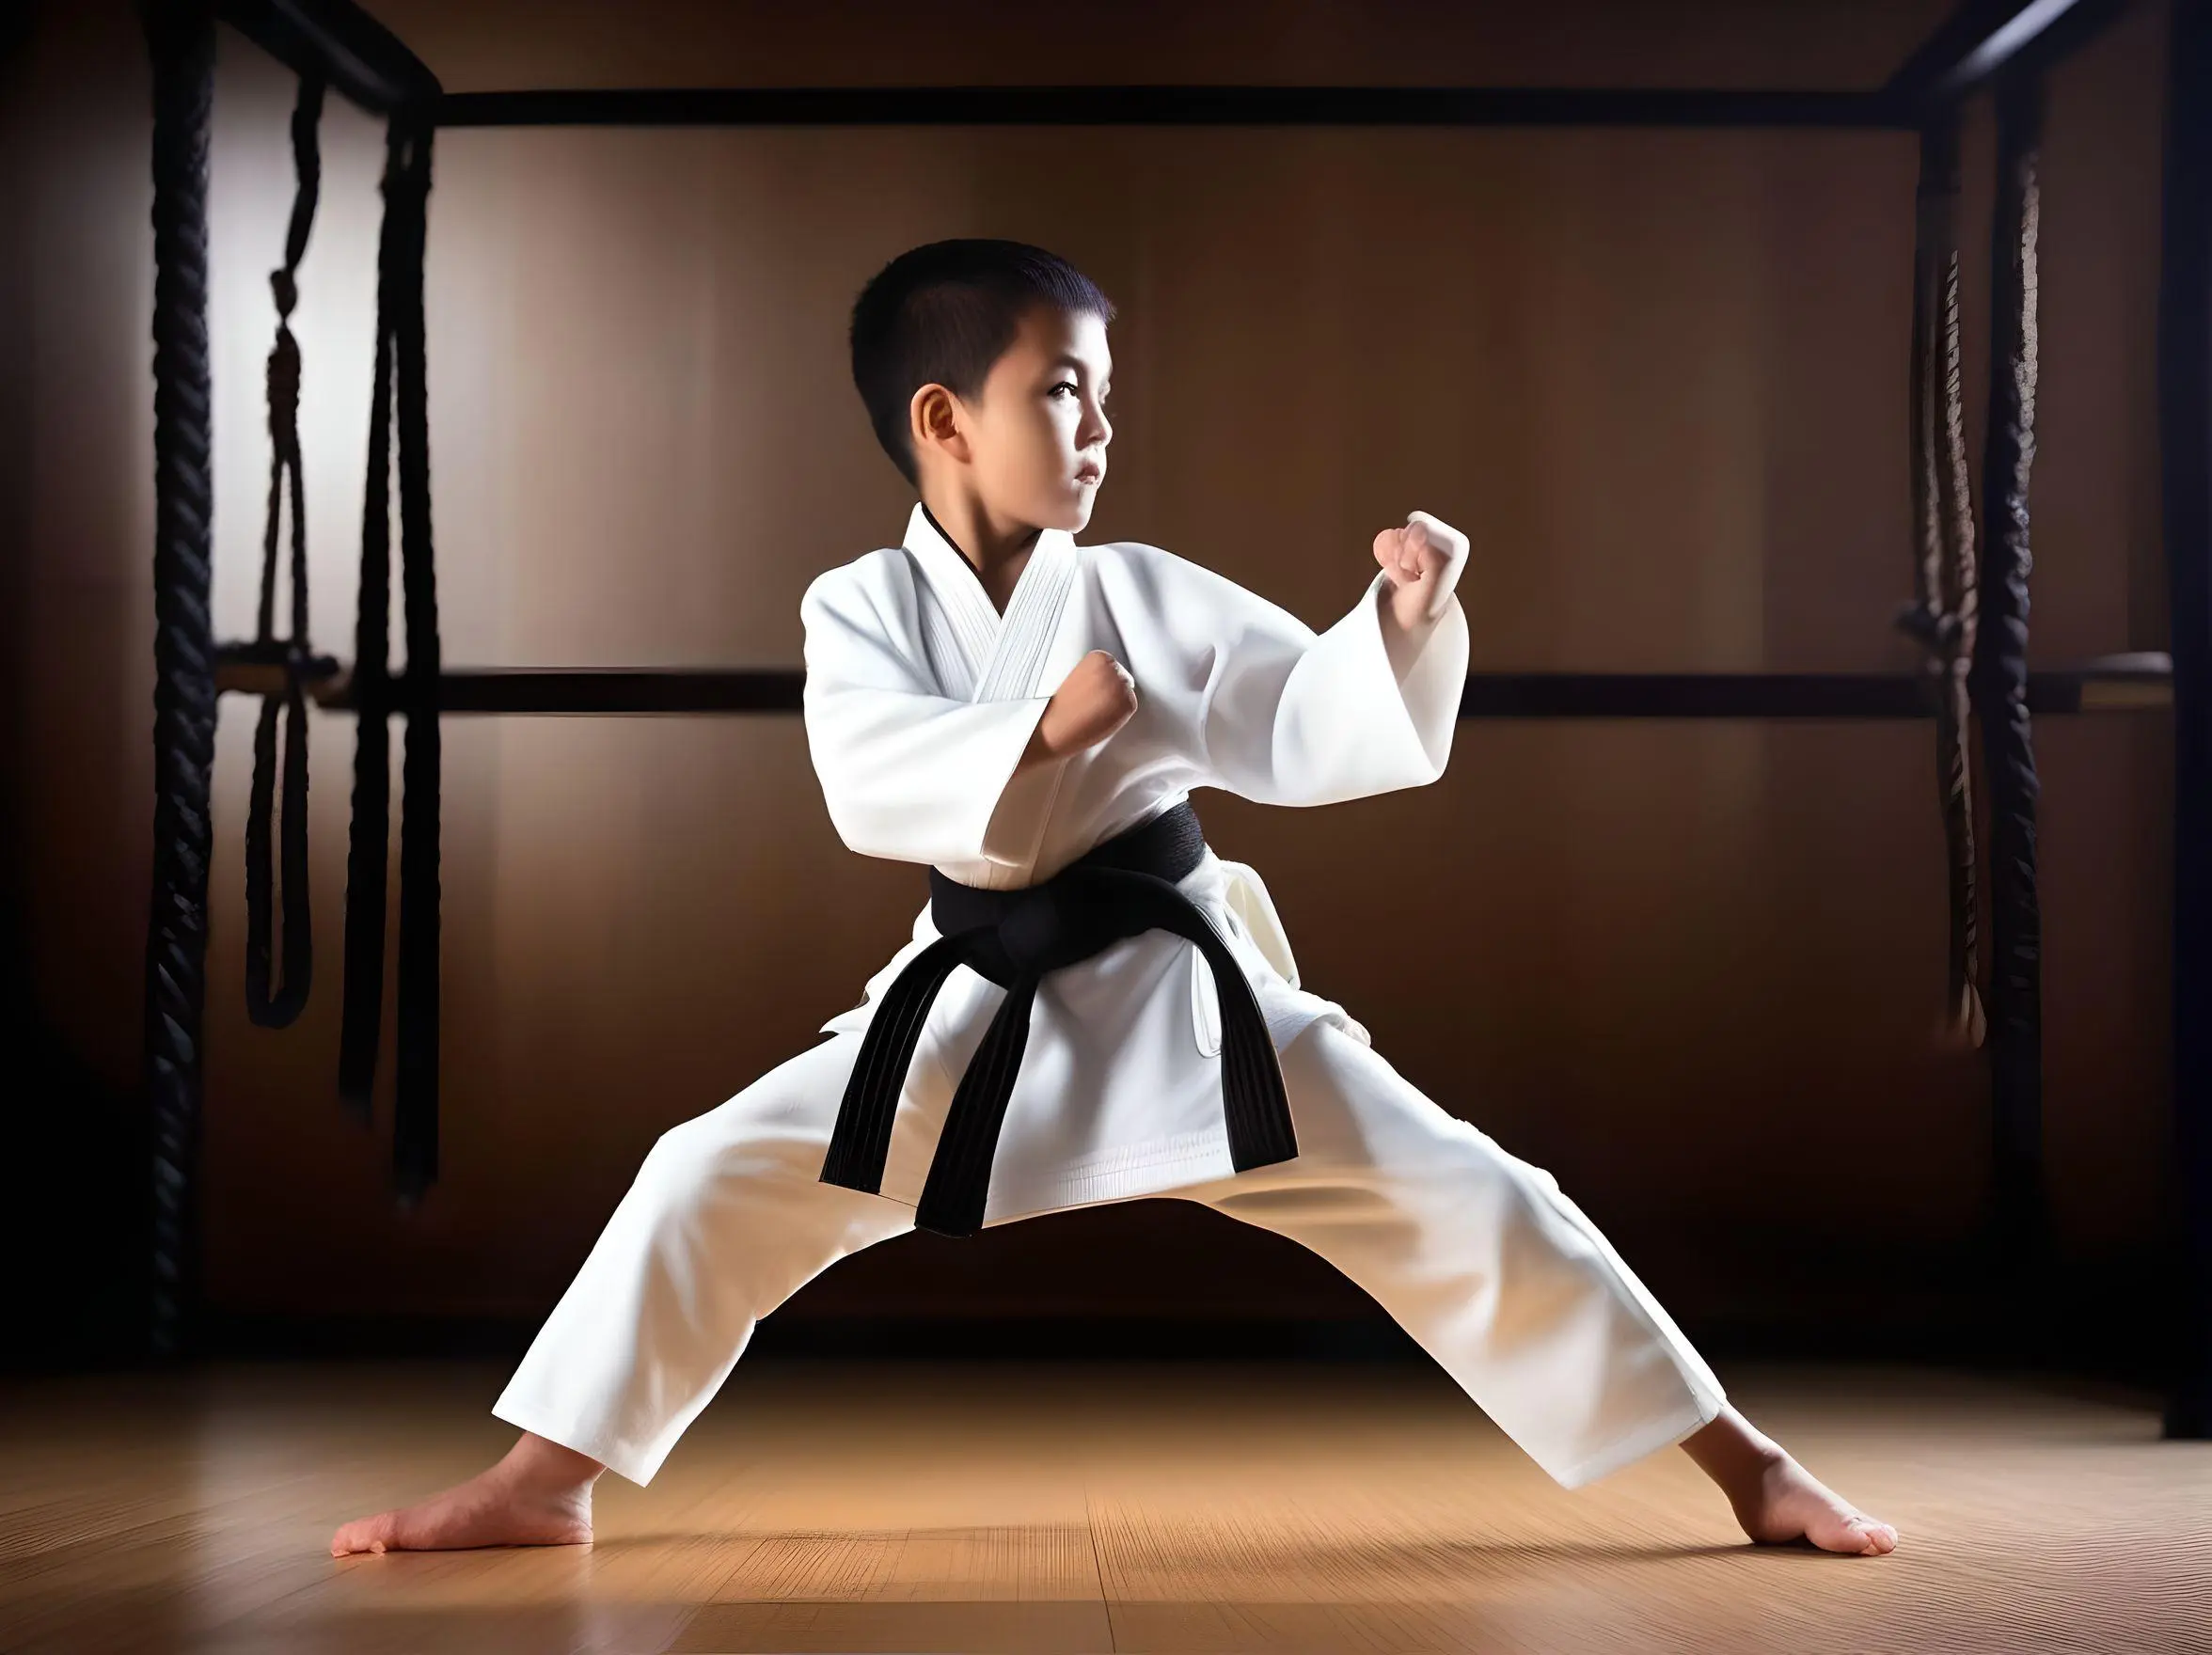 Image of a child practicing martial arts, showcasing the empowering impact of movement for children's development and confidence-building.